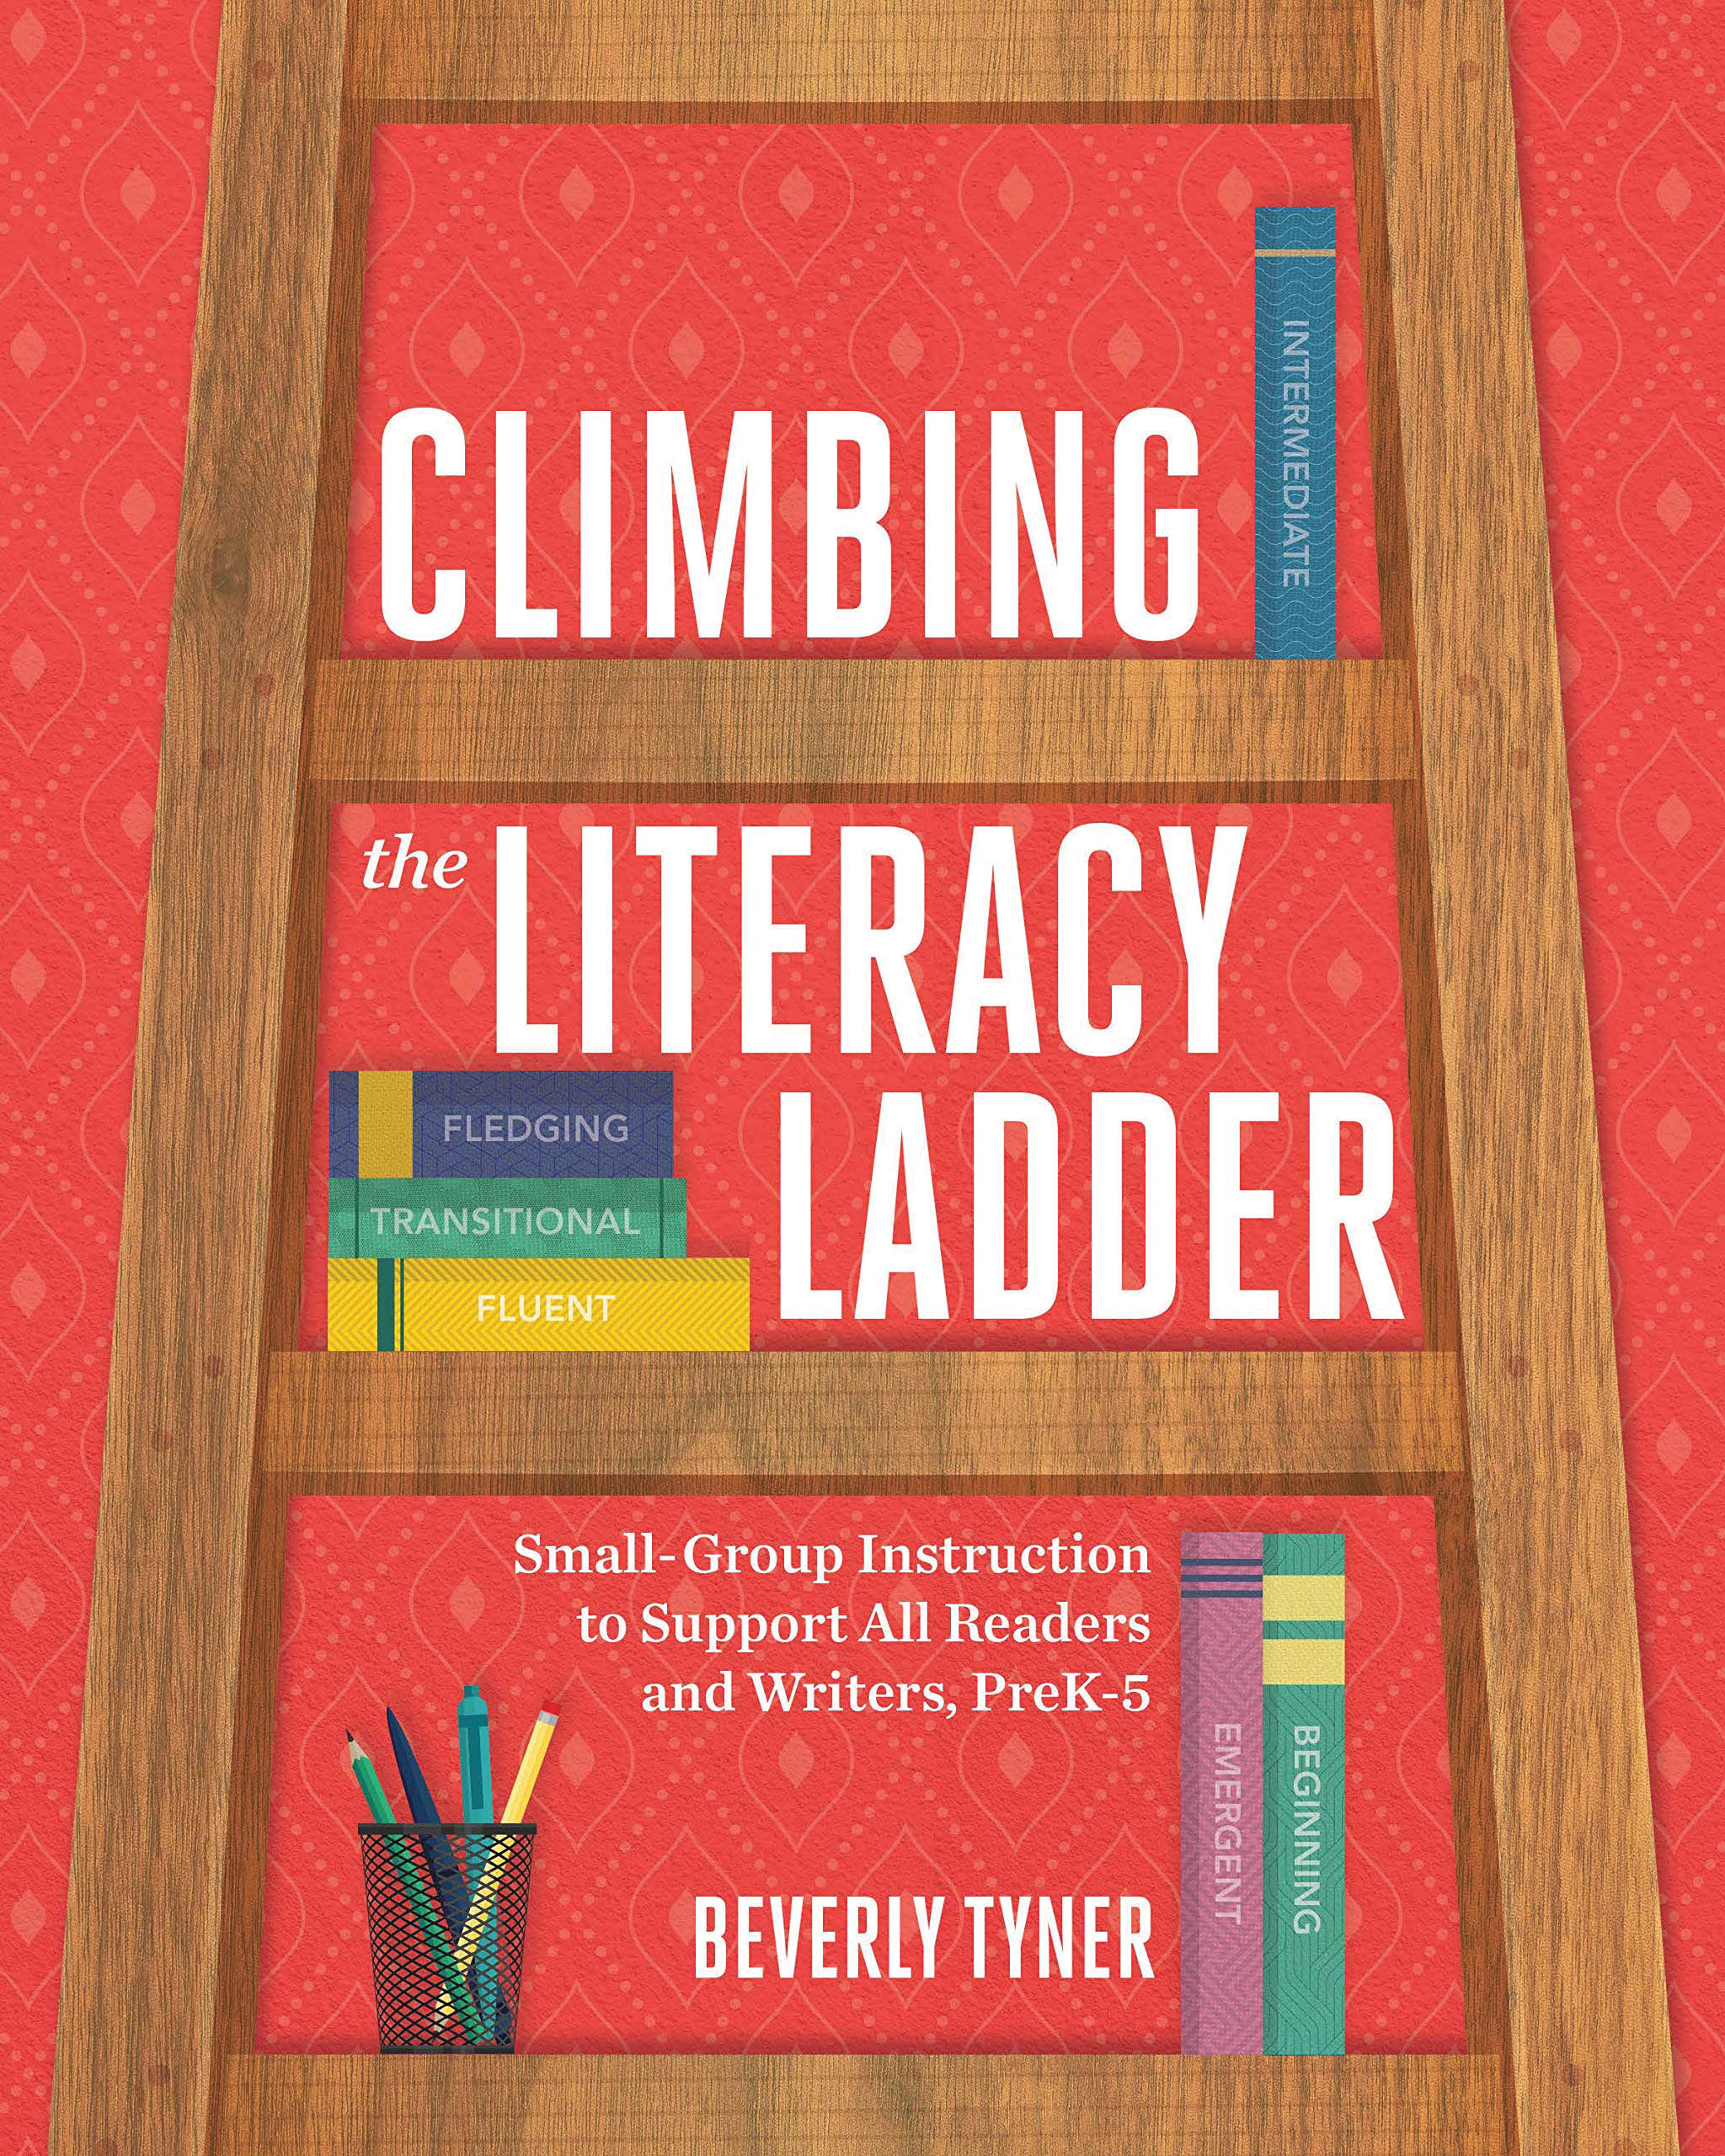 'Climbing the Literacy Ladder' ebook cover.